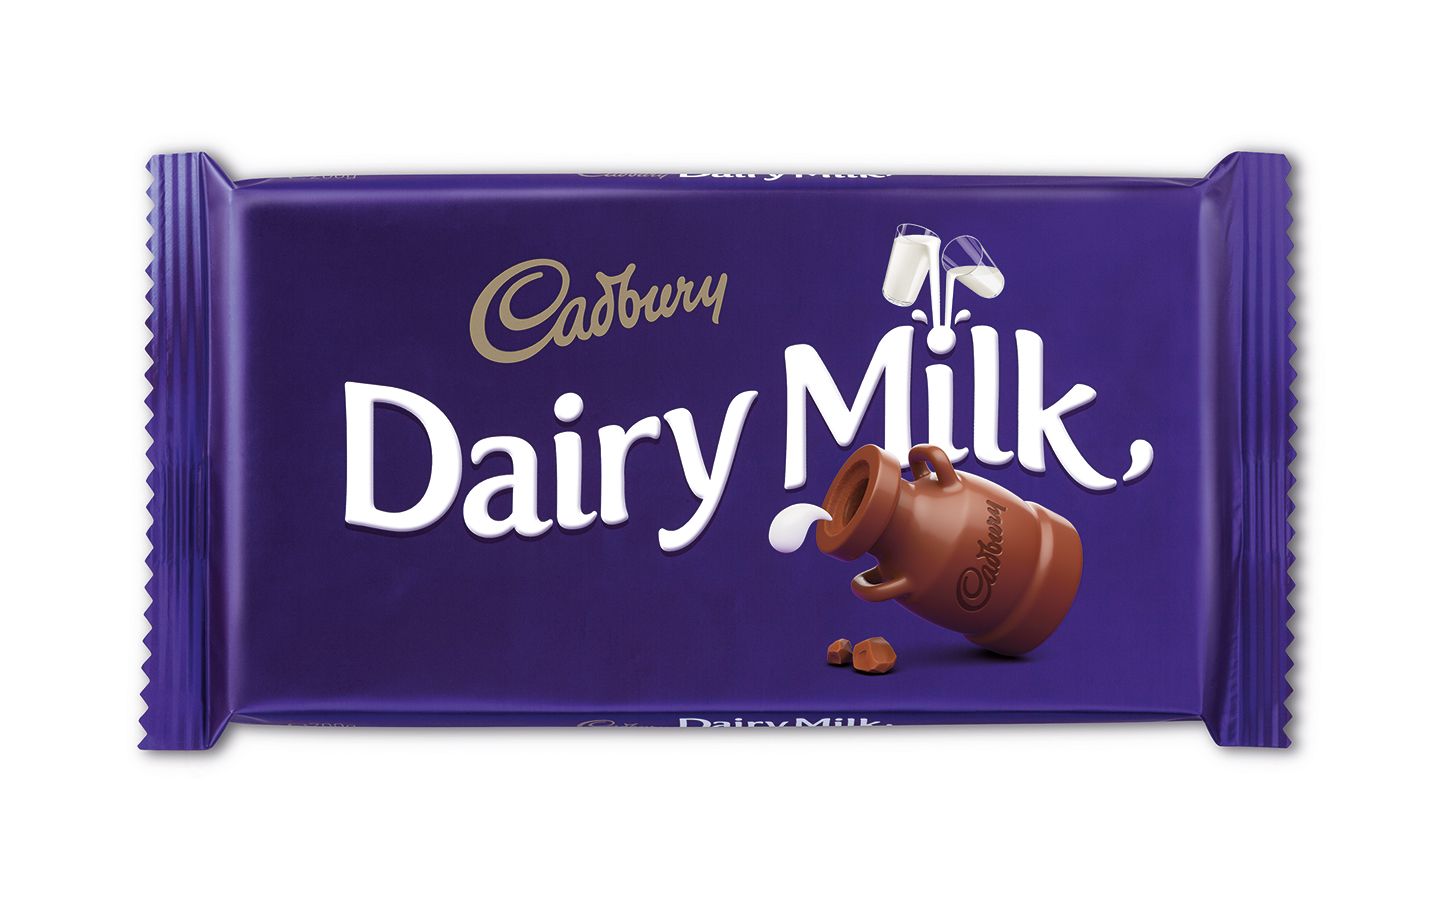 Cadbury Dairy Milk rolls out new look from Pearlfisher